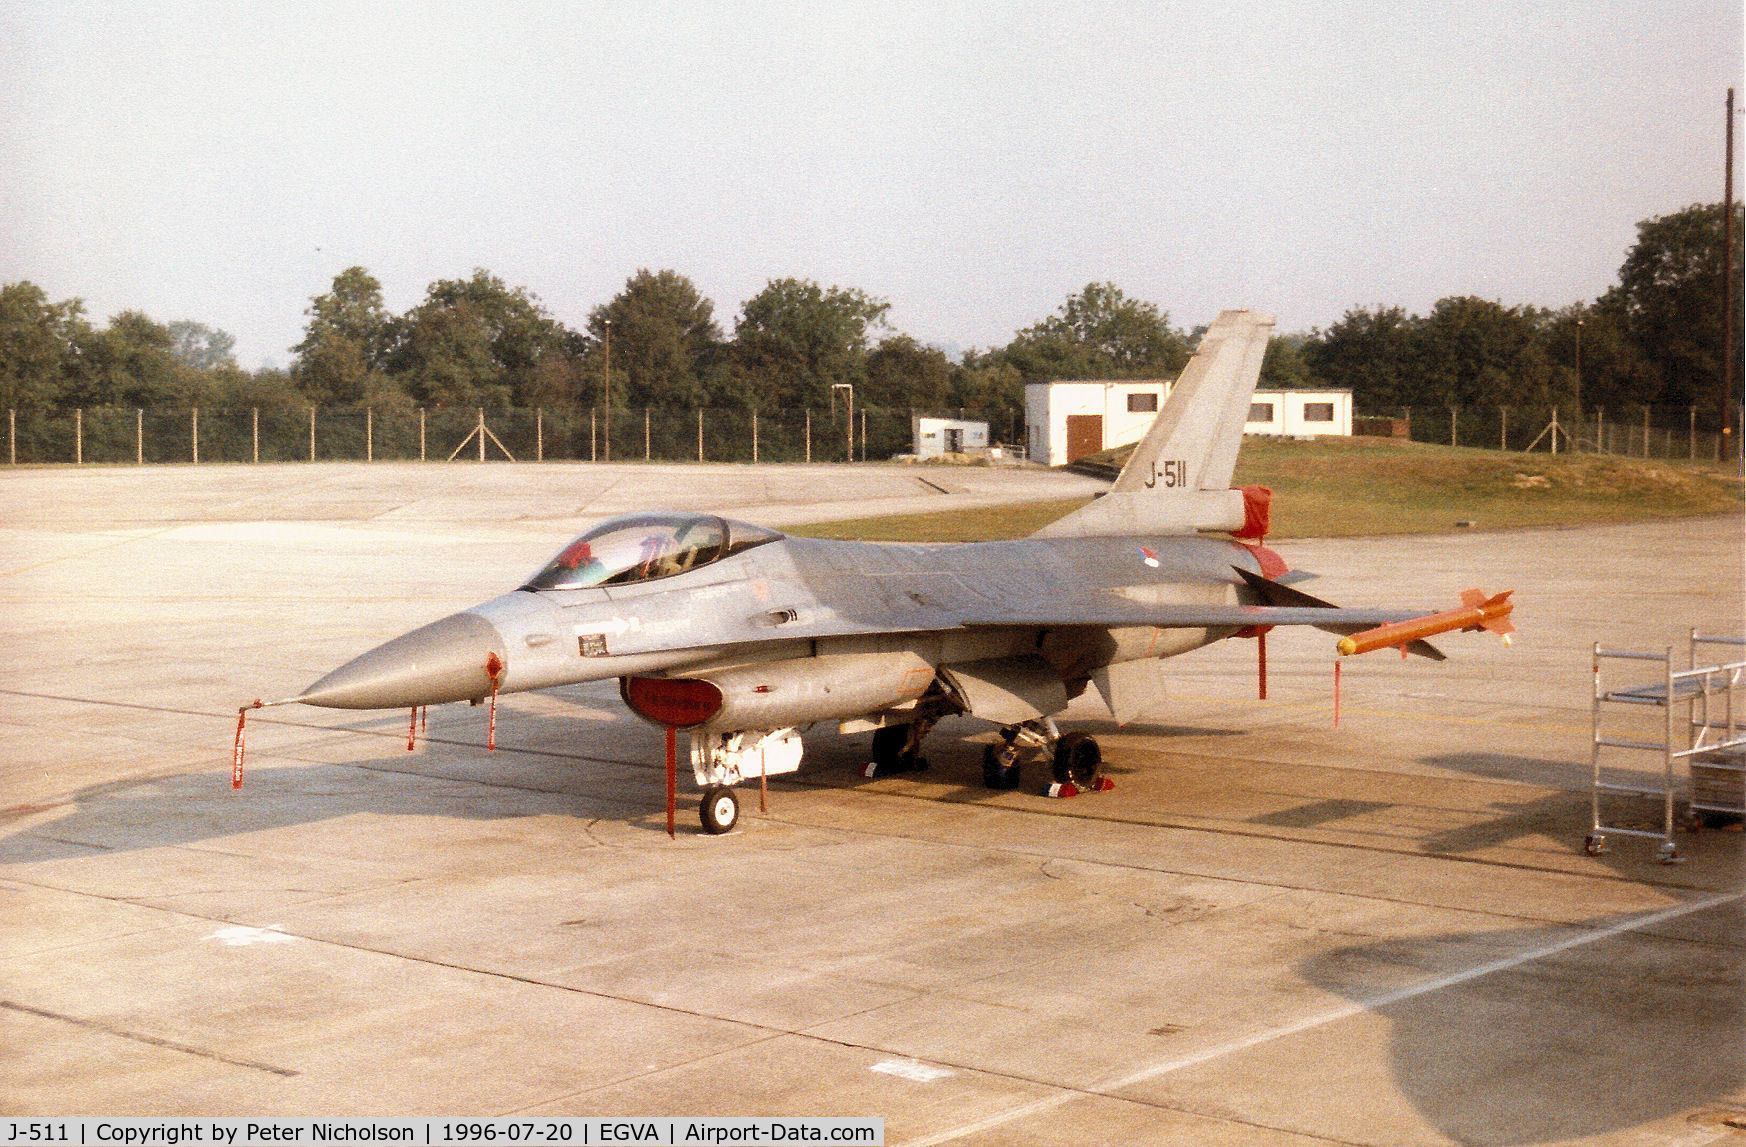 J-511, 1989 Fokker F-16A Fighting Falcon C/N 6D-150, F-16A Falcon of 306 Squadron of the Royal Netherlands Air Force on the flight-line at the 1996 Royal Intnl Air Tattoo at RAF Fairford.